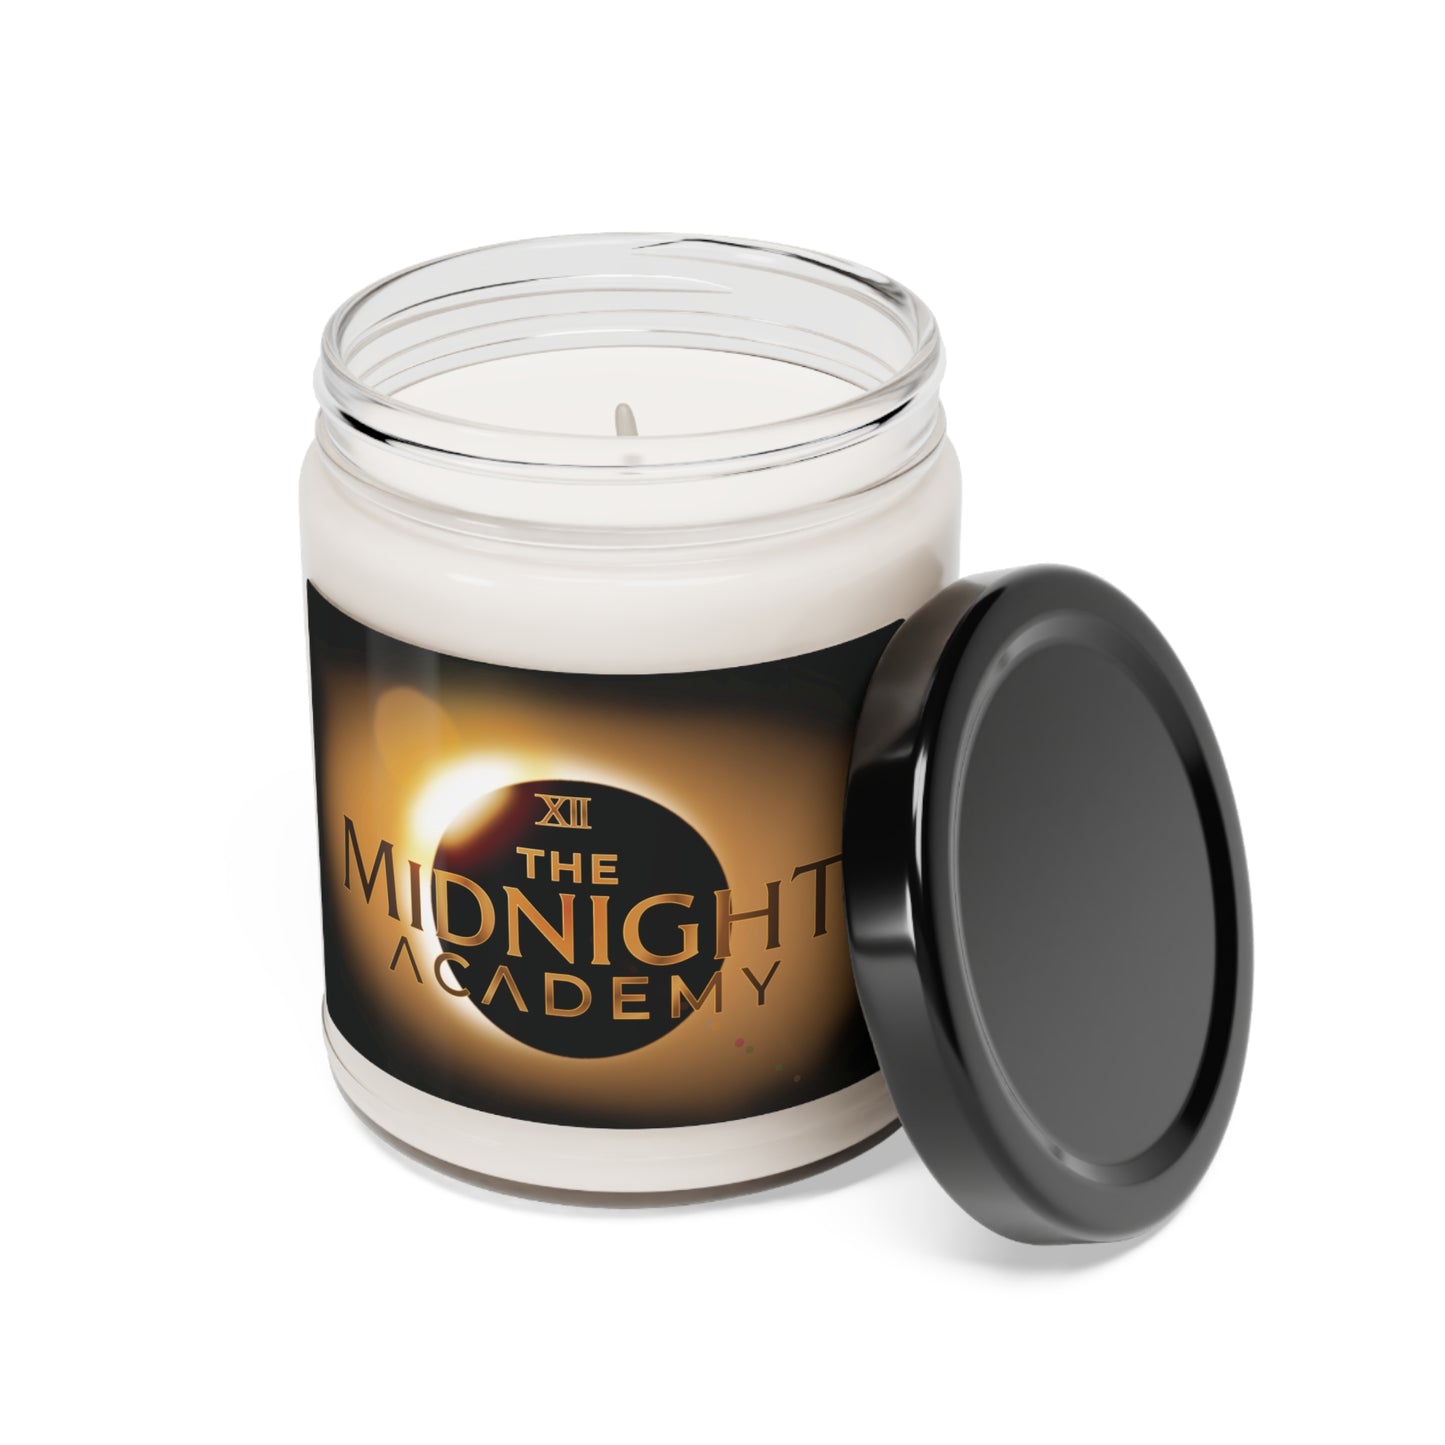 The Midnight Academy - Coconut Cream and Cardamom Scented Soy Candle, 9oz